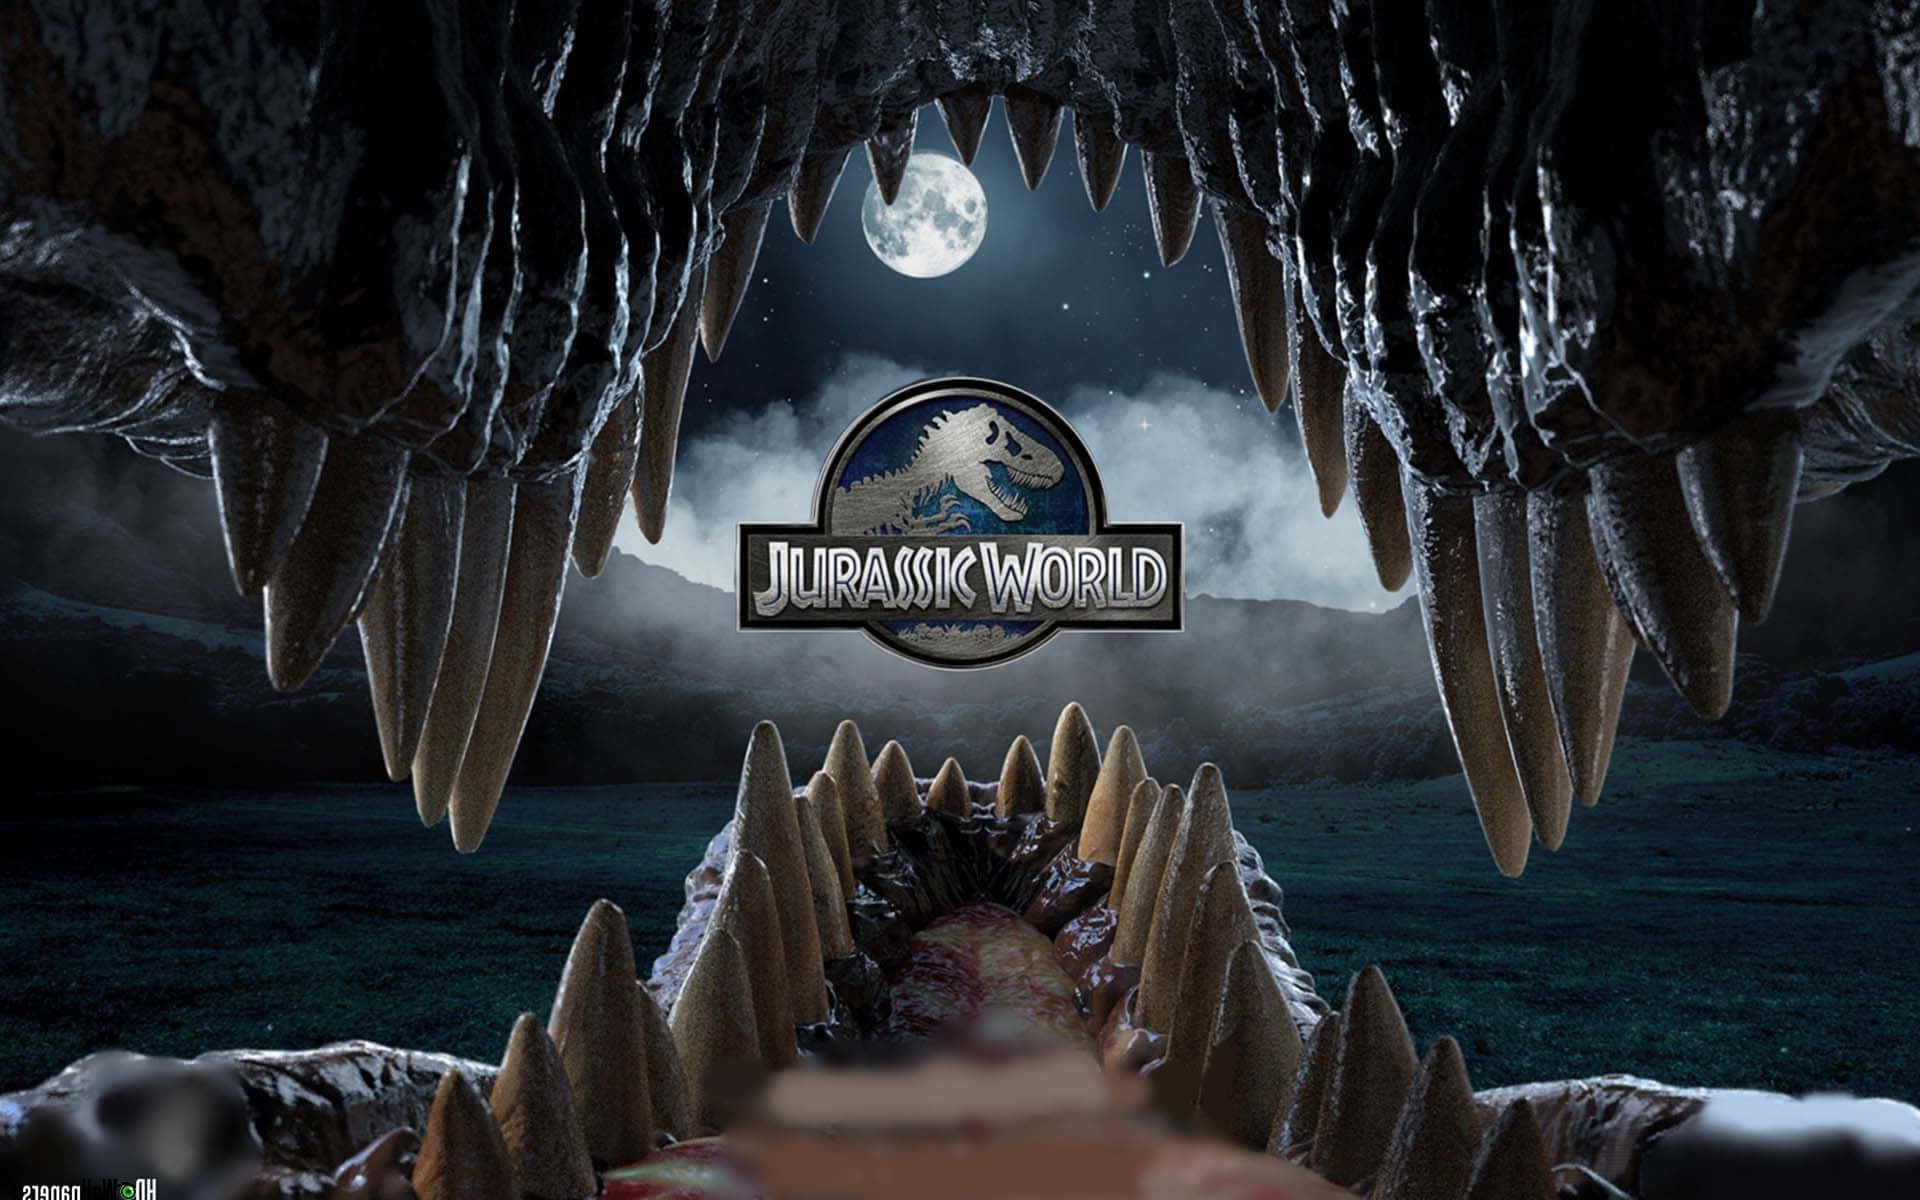 An epic journey of adventure and discovery at Jurassic World